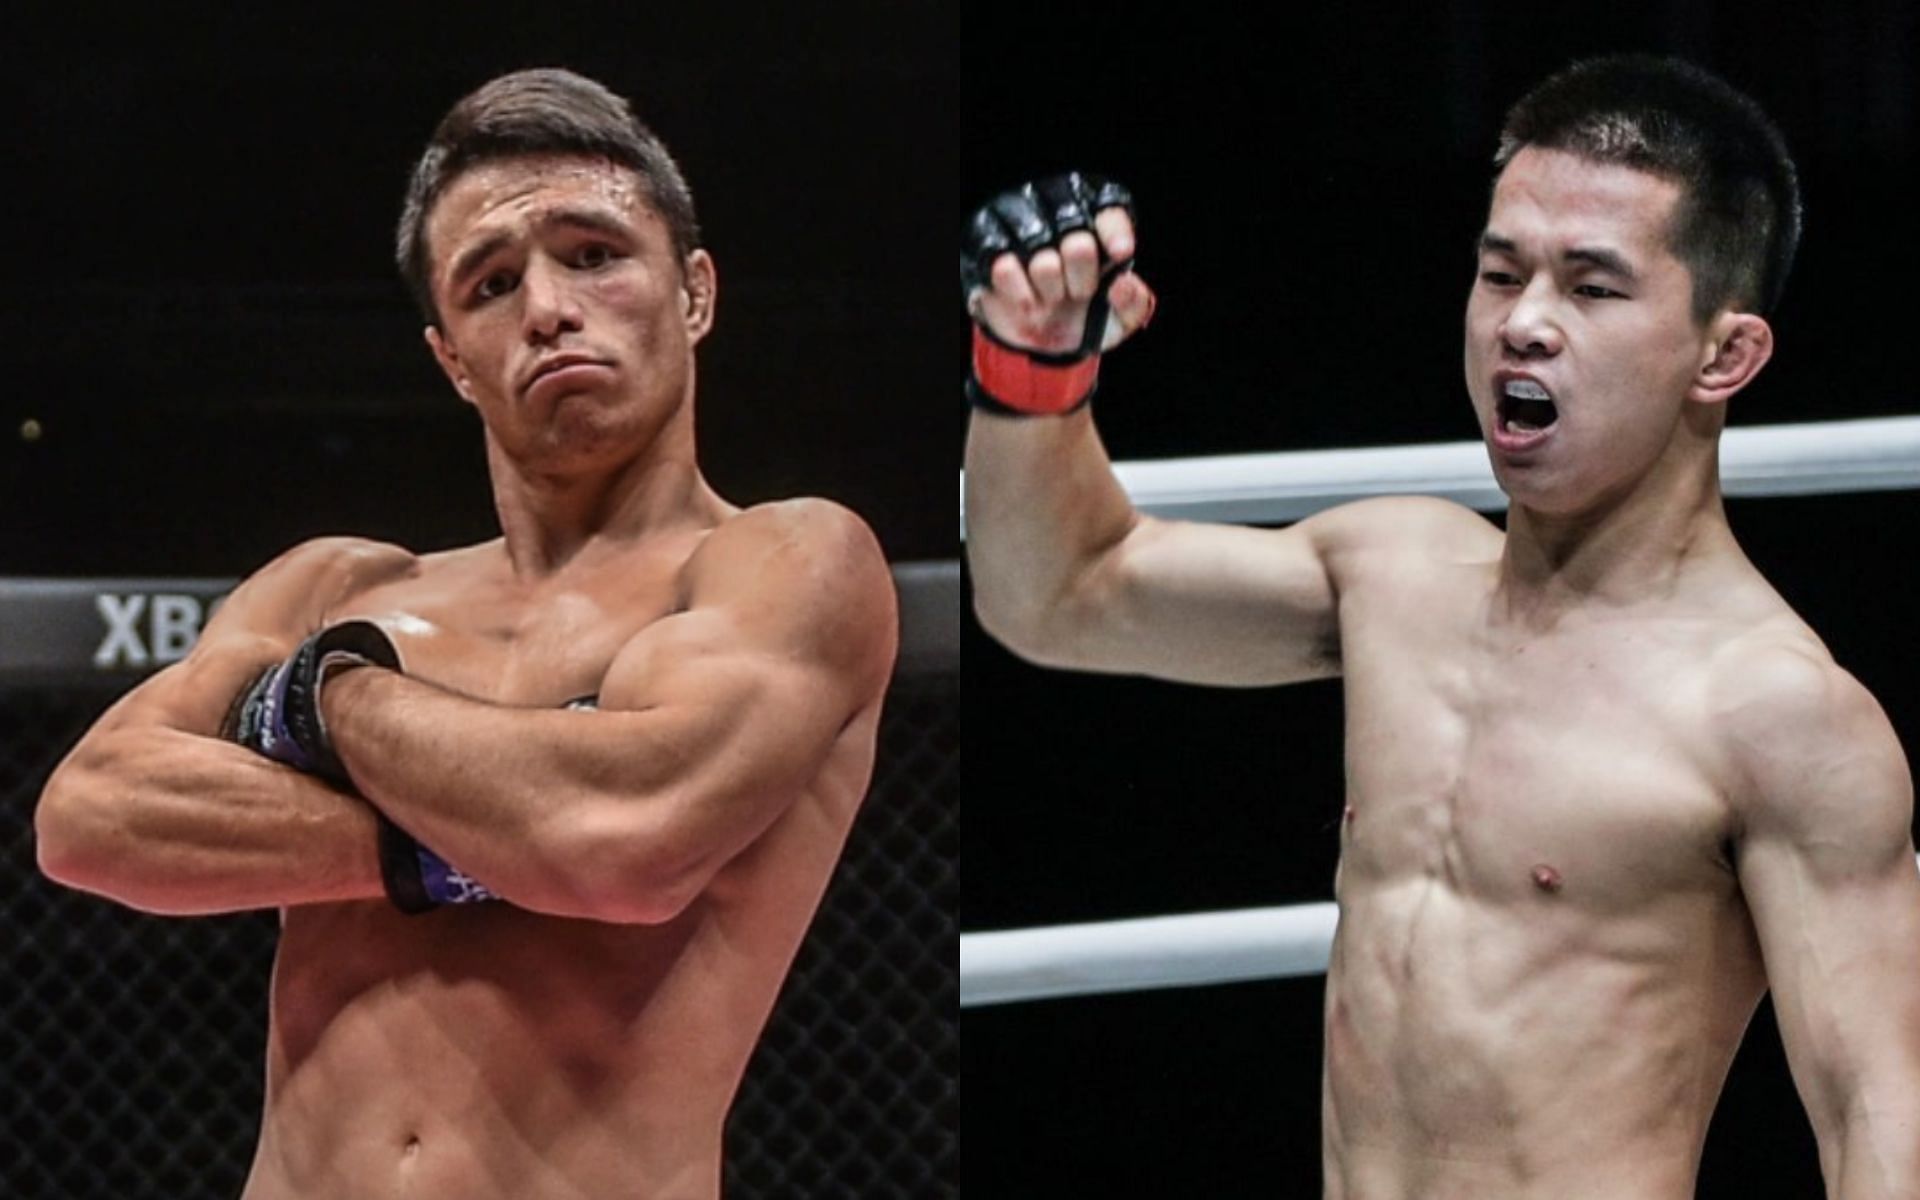 Reece McLaren (left) will face Xie Wei (right) at ONE 158. [Photos ONE Championship]